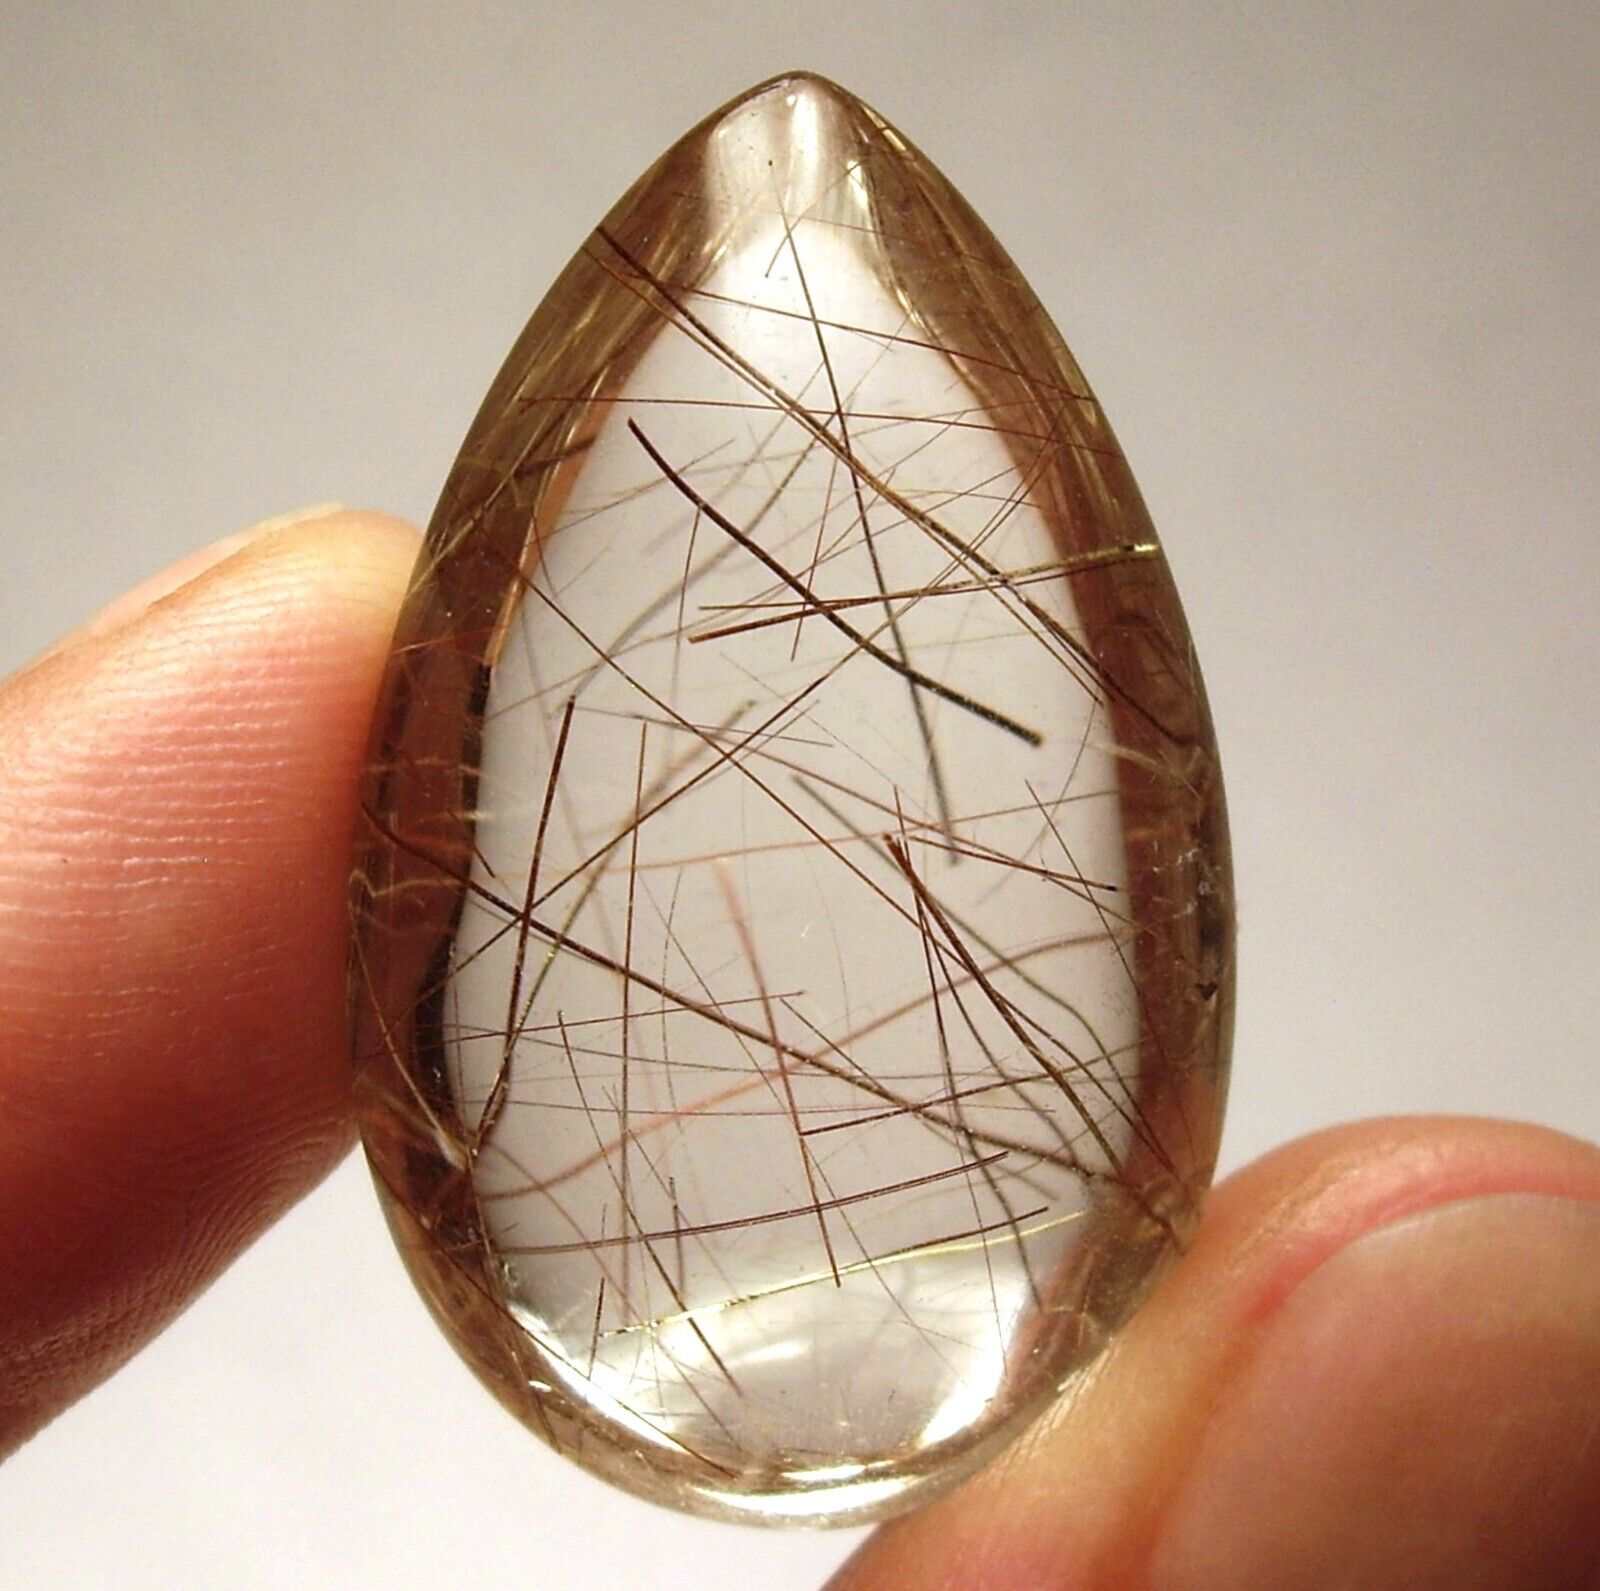 Red Rutile Needle Crystals Inside Polished Clear Quartz Teardrop, 10.7g